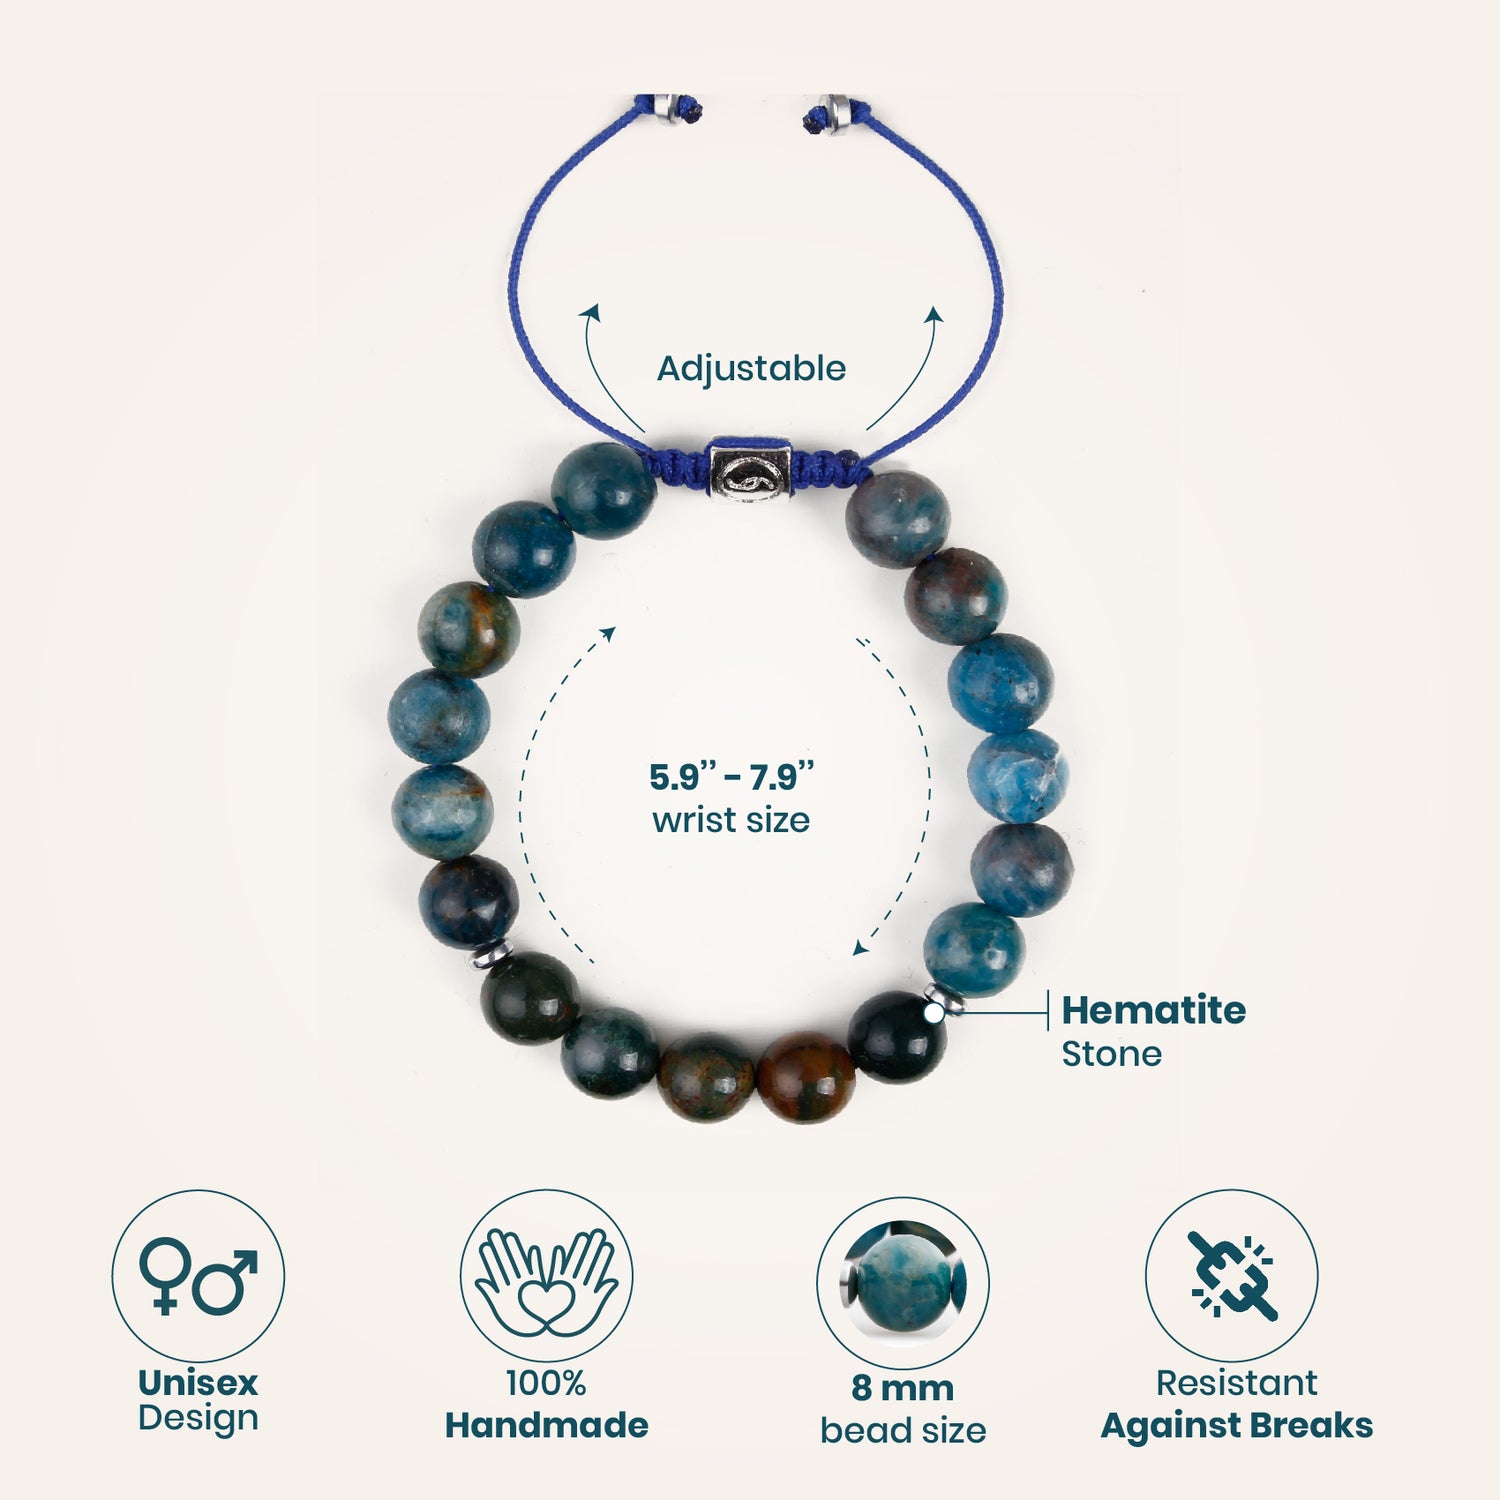 Handmade bracelet for health and wellbeing